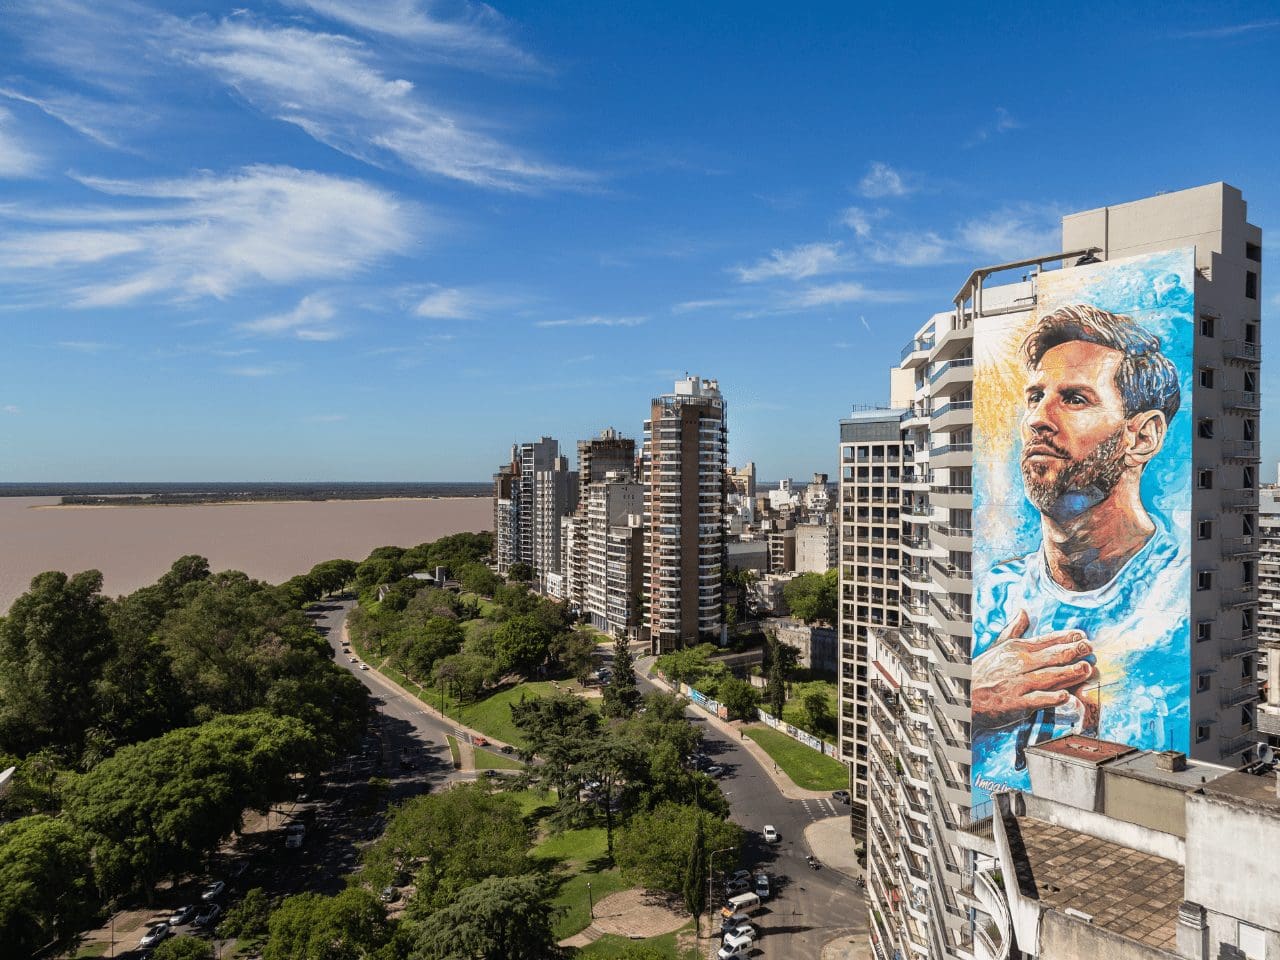 Mural of Lionel Messi by Argentine artist in Rosario